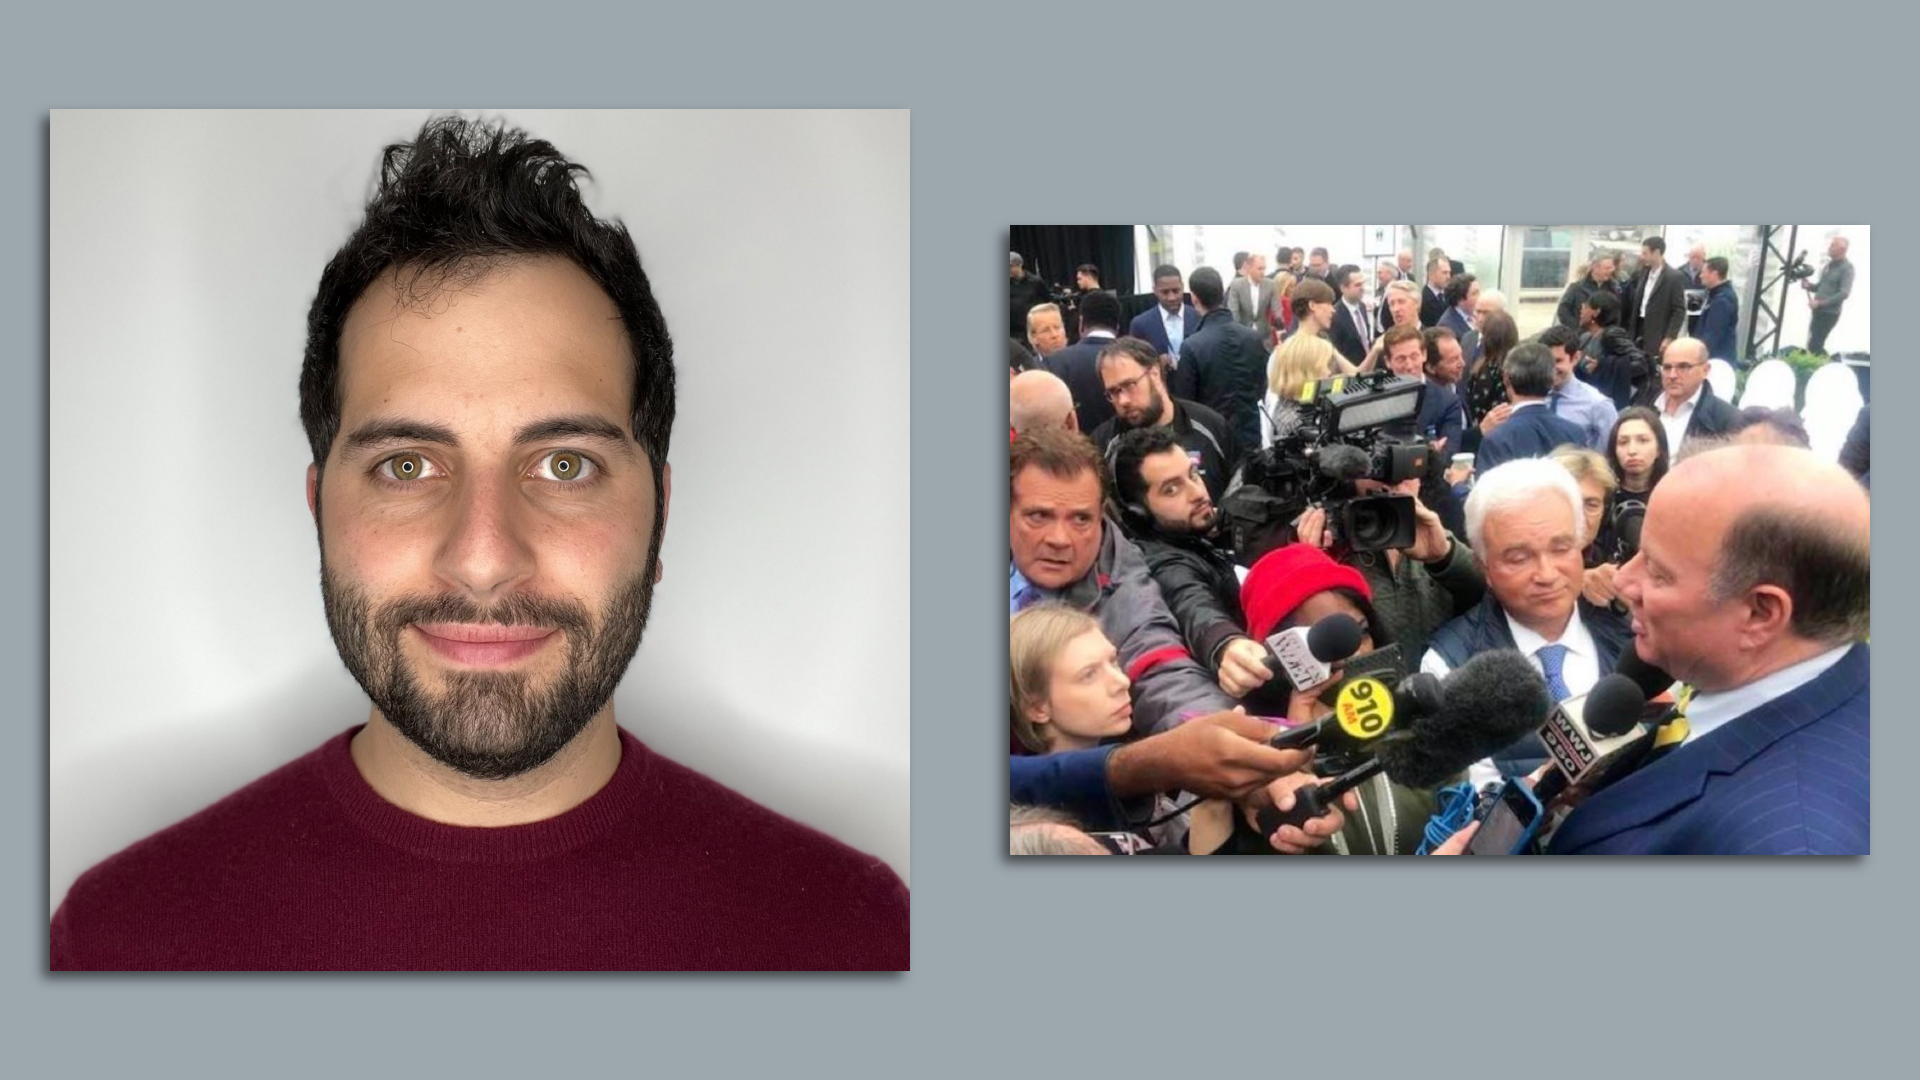 A headshot of Eli Newman and a photo of him reporting from a scrum.